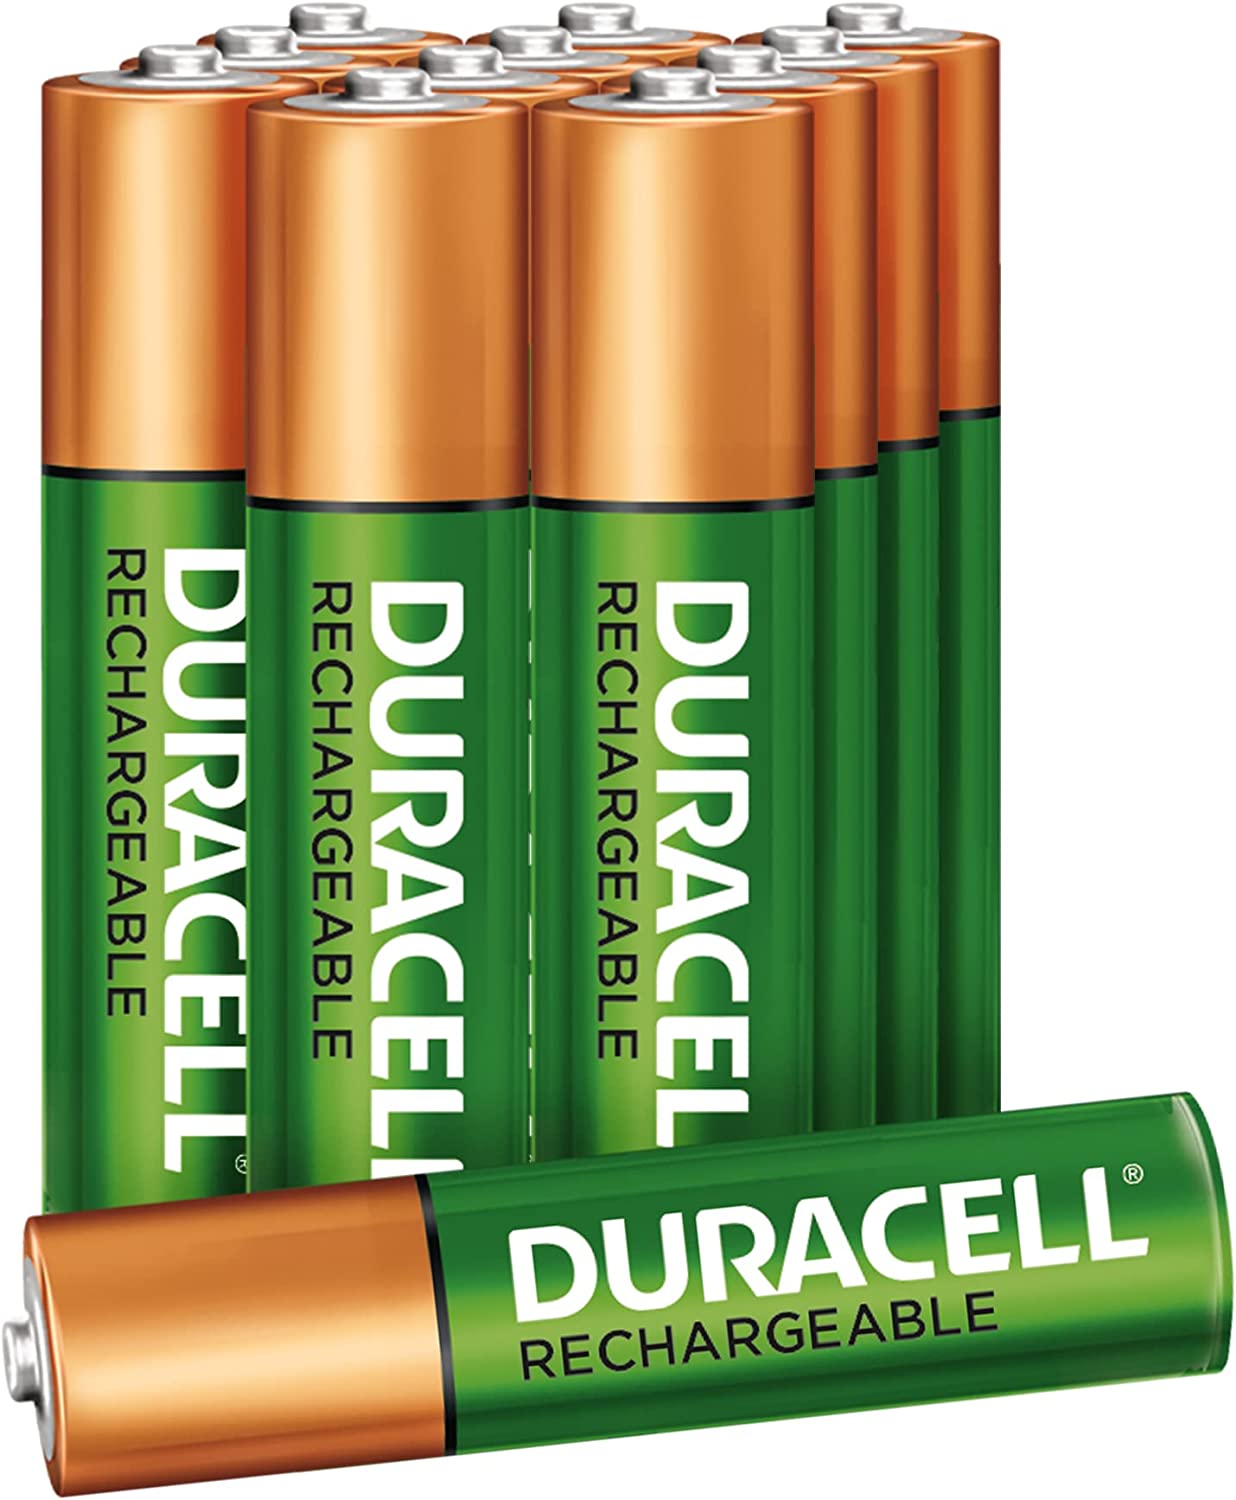 Duracell Rechargeable AA Batteries 12 Count - The Perfect Choice for Toys, Remote Controls, and More